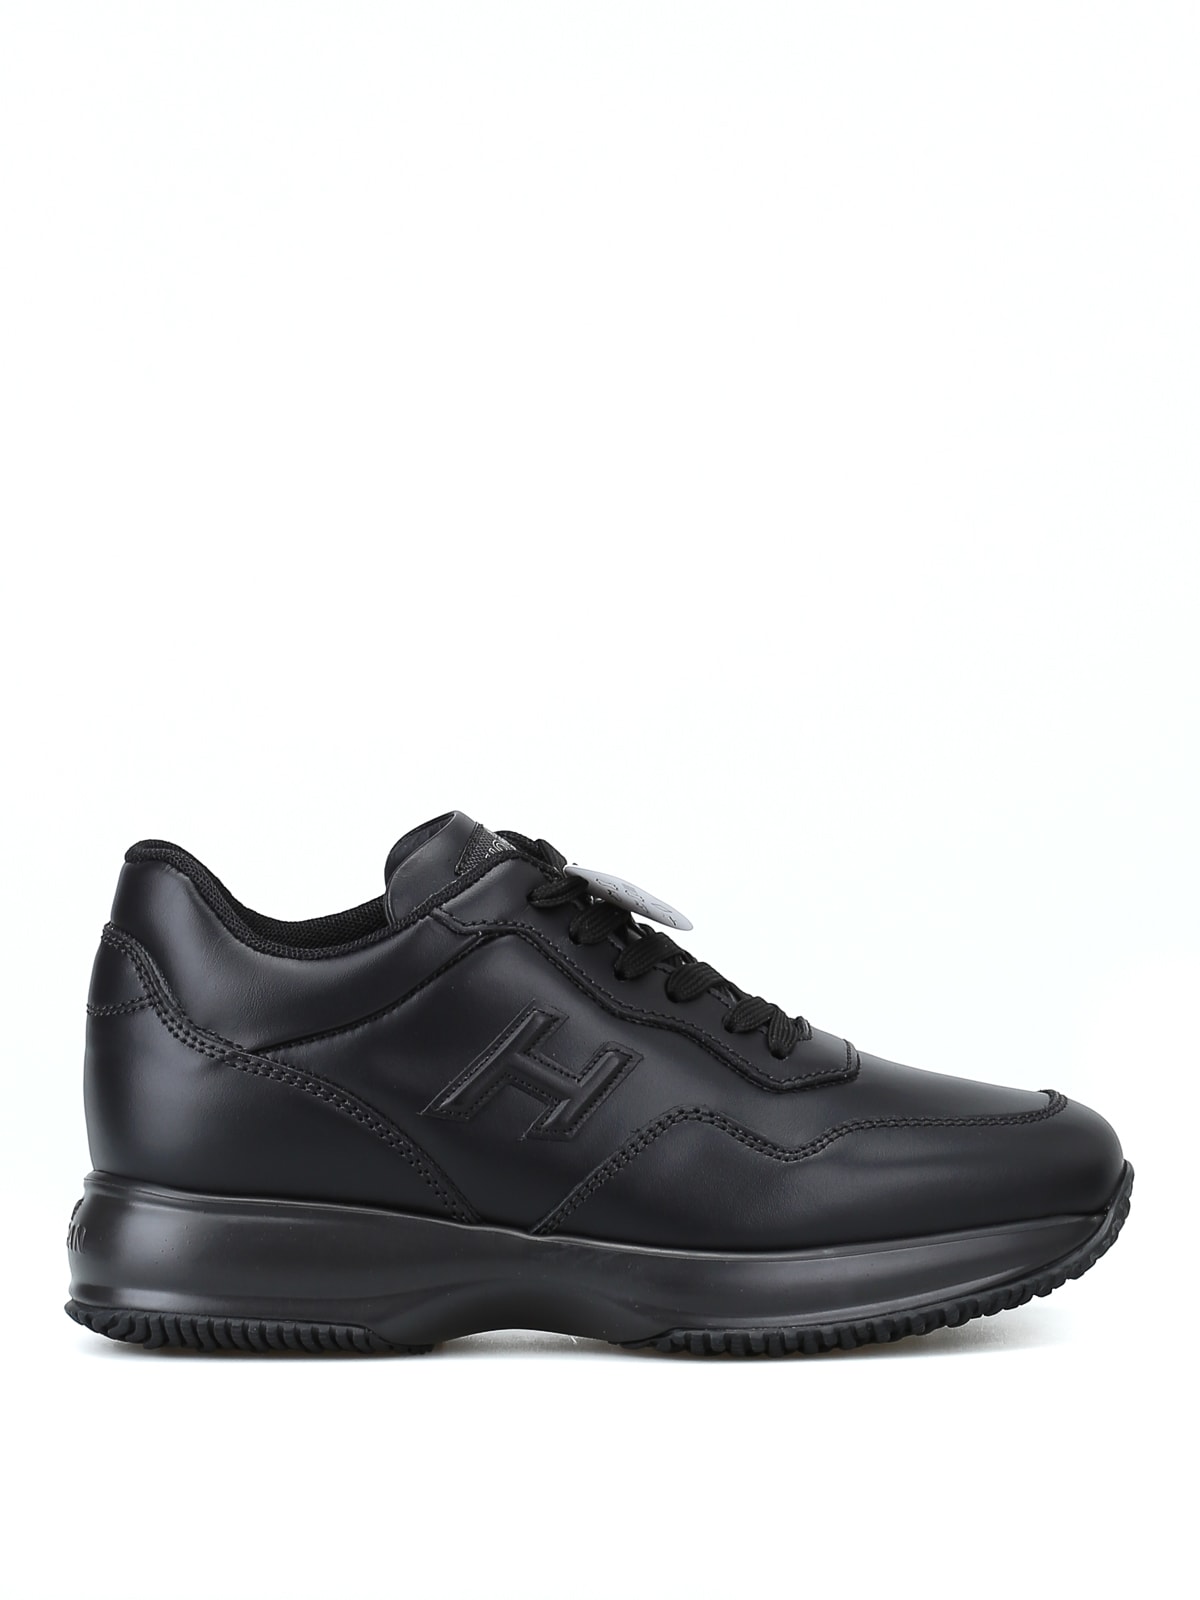 Hogan Interactive H 3d Black Leather Sneakers